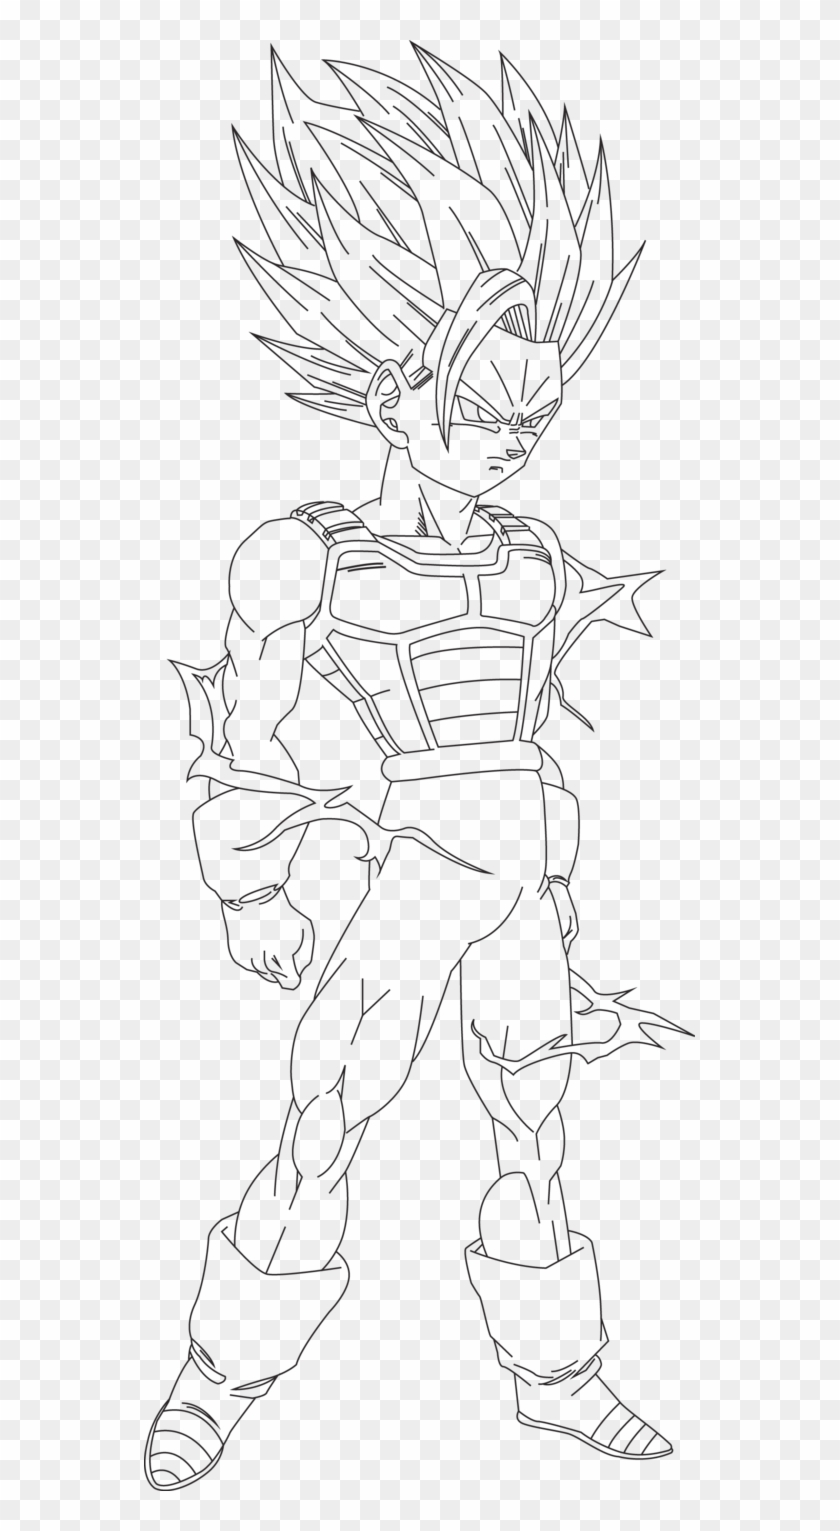 Gohan Ssj2 Coloring Pages Cell Saga By And Colouring Pages